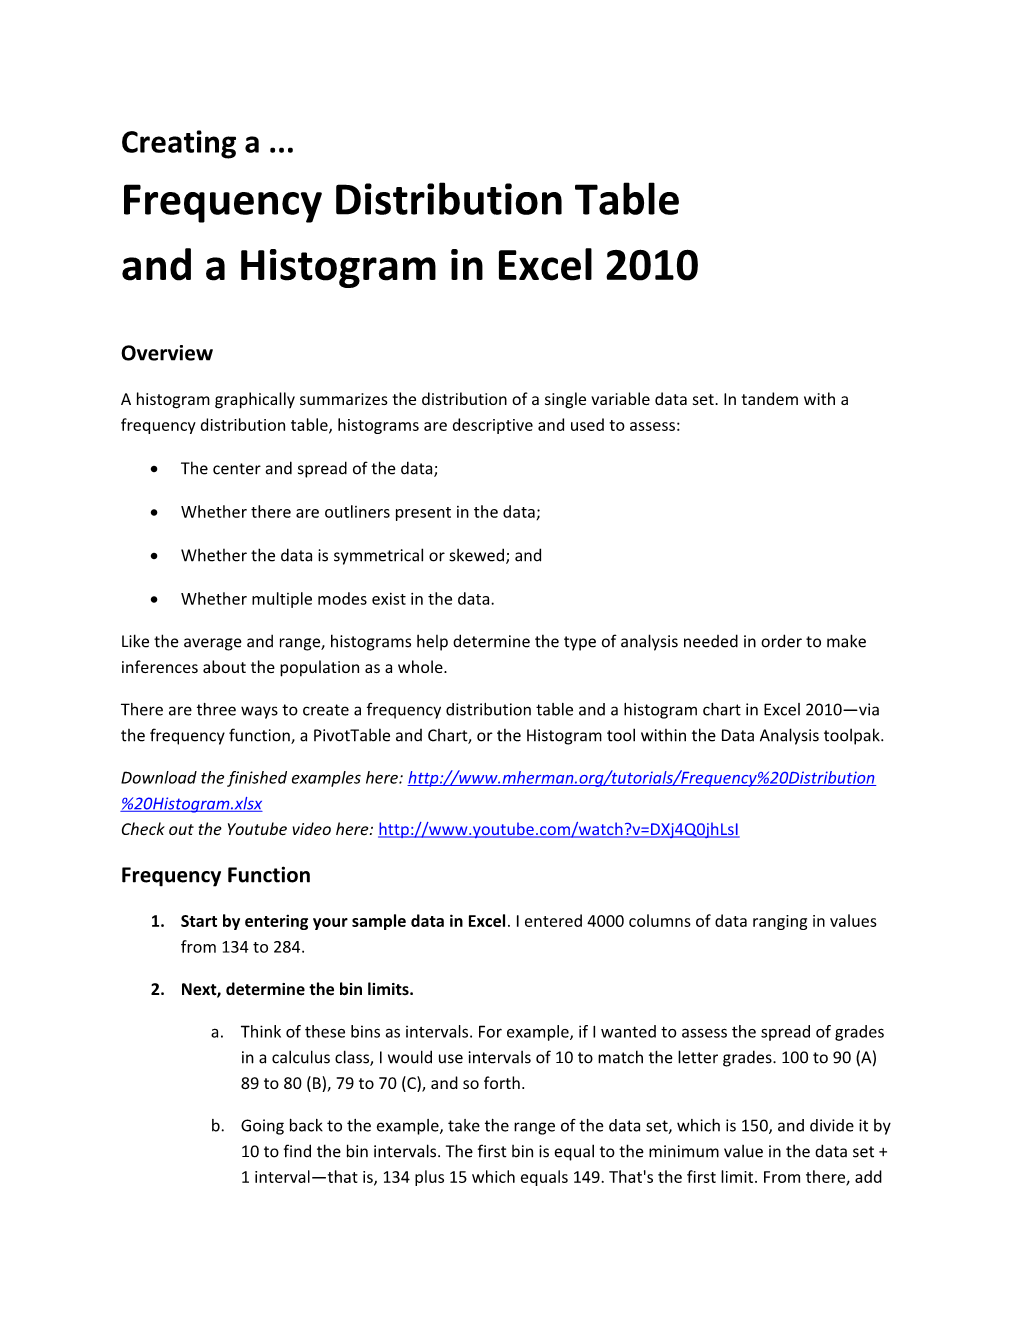 Creating a Frequency Distribution Table and a Histogram in Excel 2010